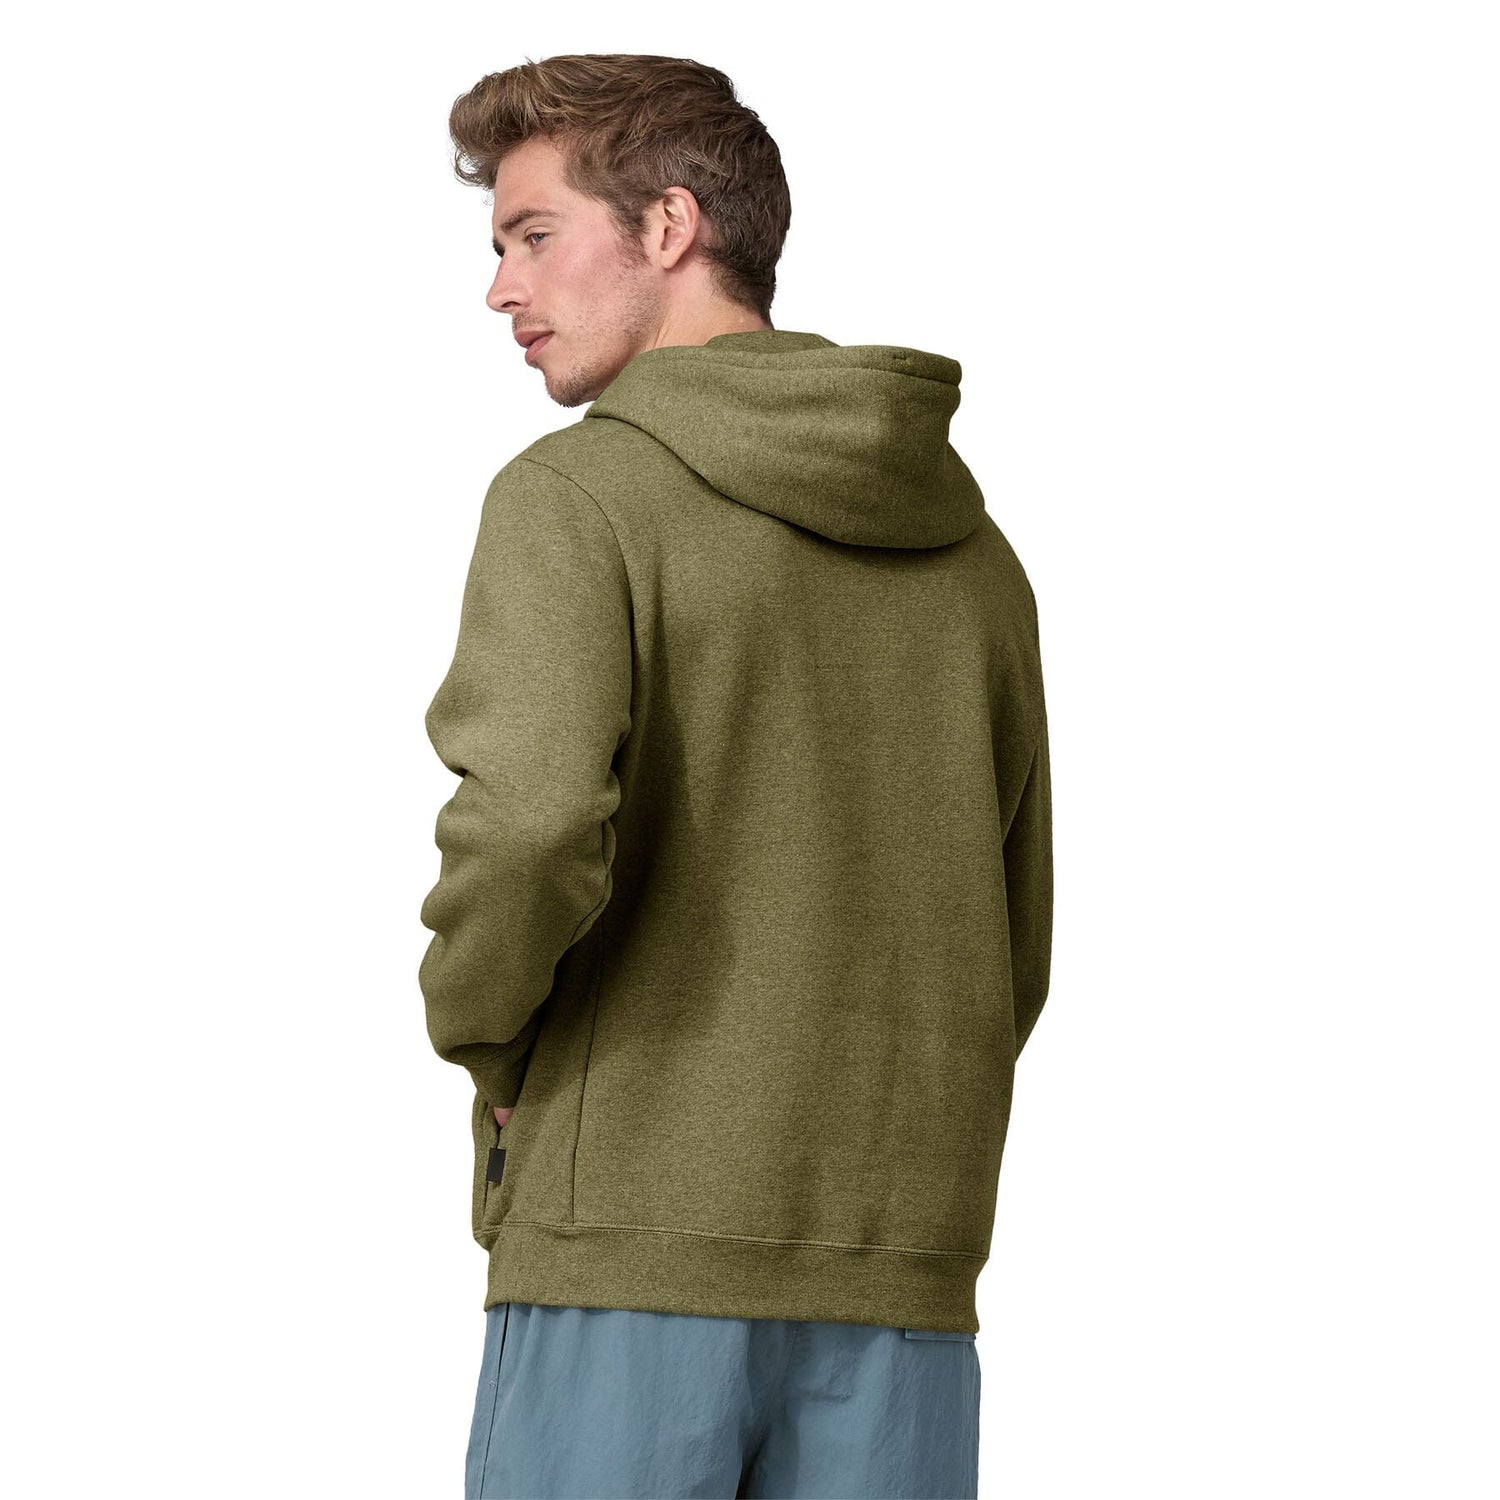 Patagonia Unisex P-6 Logo Uprisal Hoody - Made From Recycled Cotton & Recycled Polyester Buckhorn Green Shirt